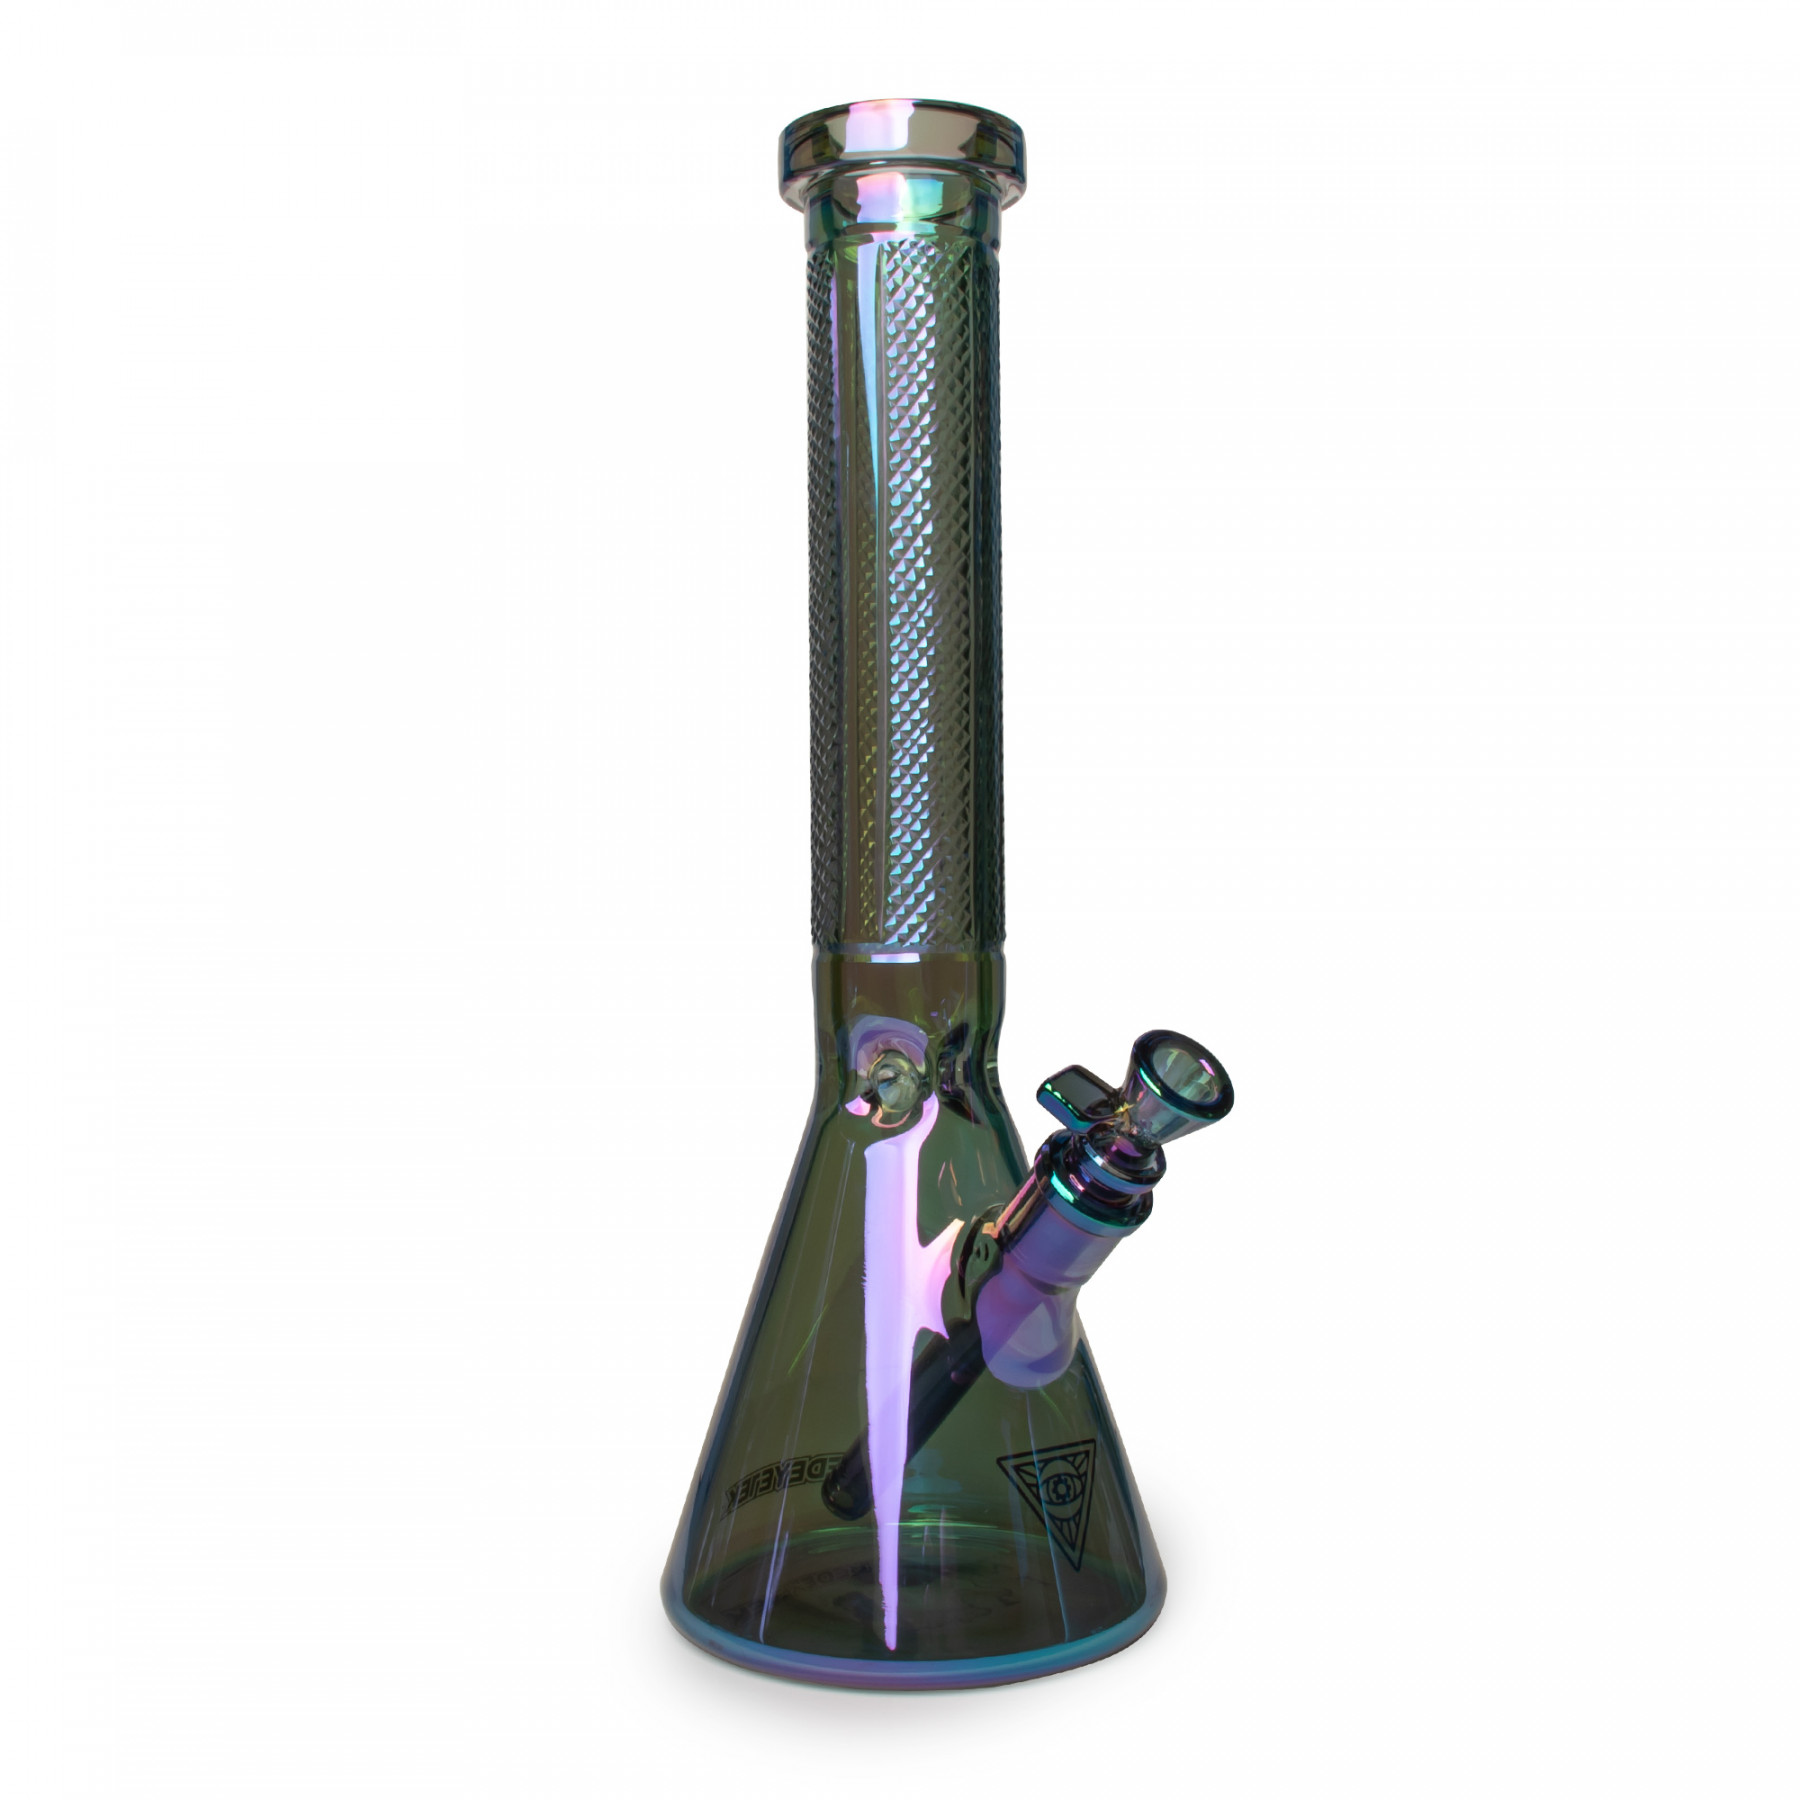 15" 7mm Thick Metallic Terminator Finish Traditions Series Beaker Tube W/Facetted Quarter Pattern Details